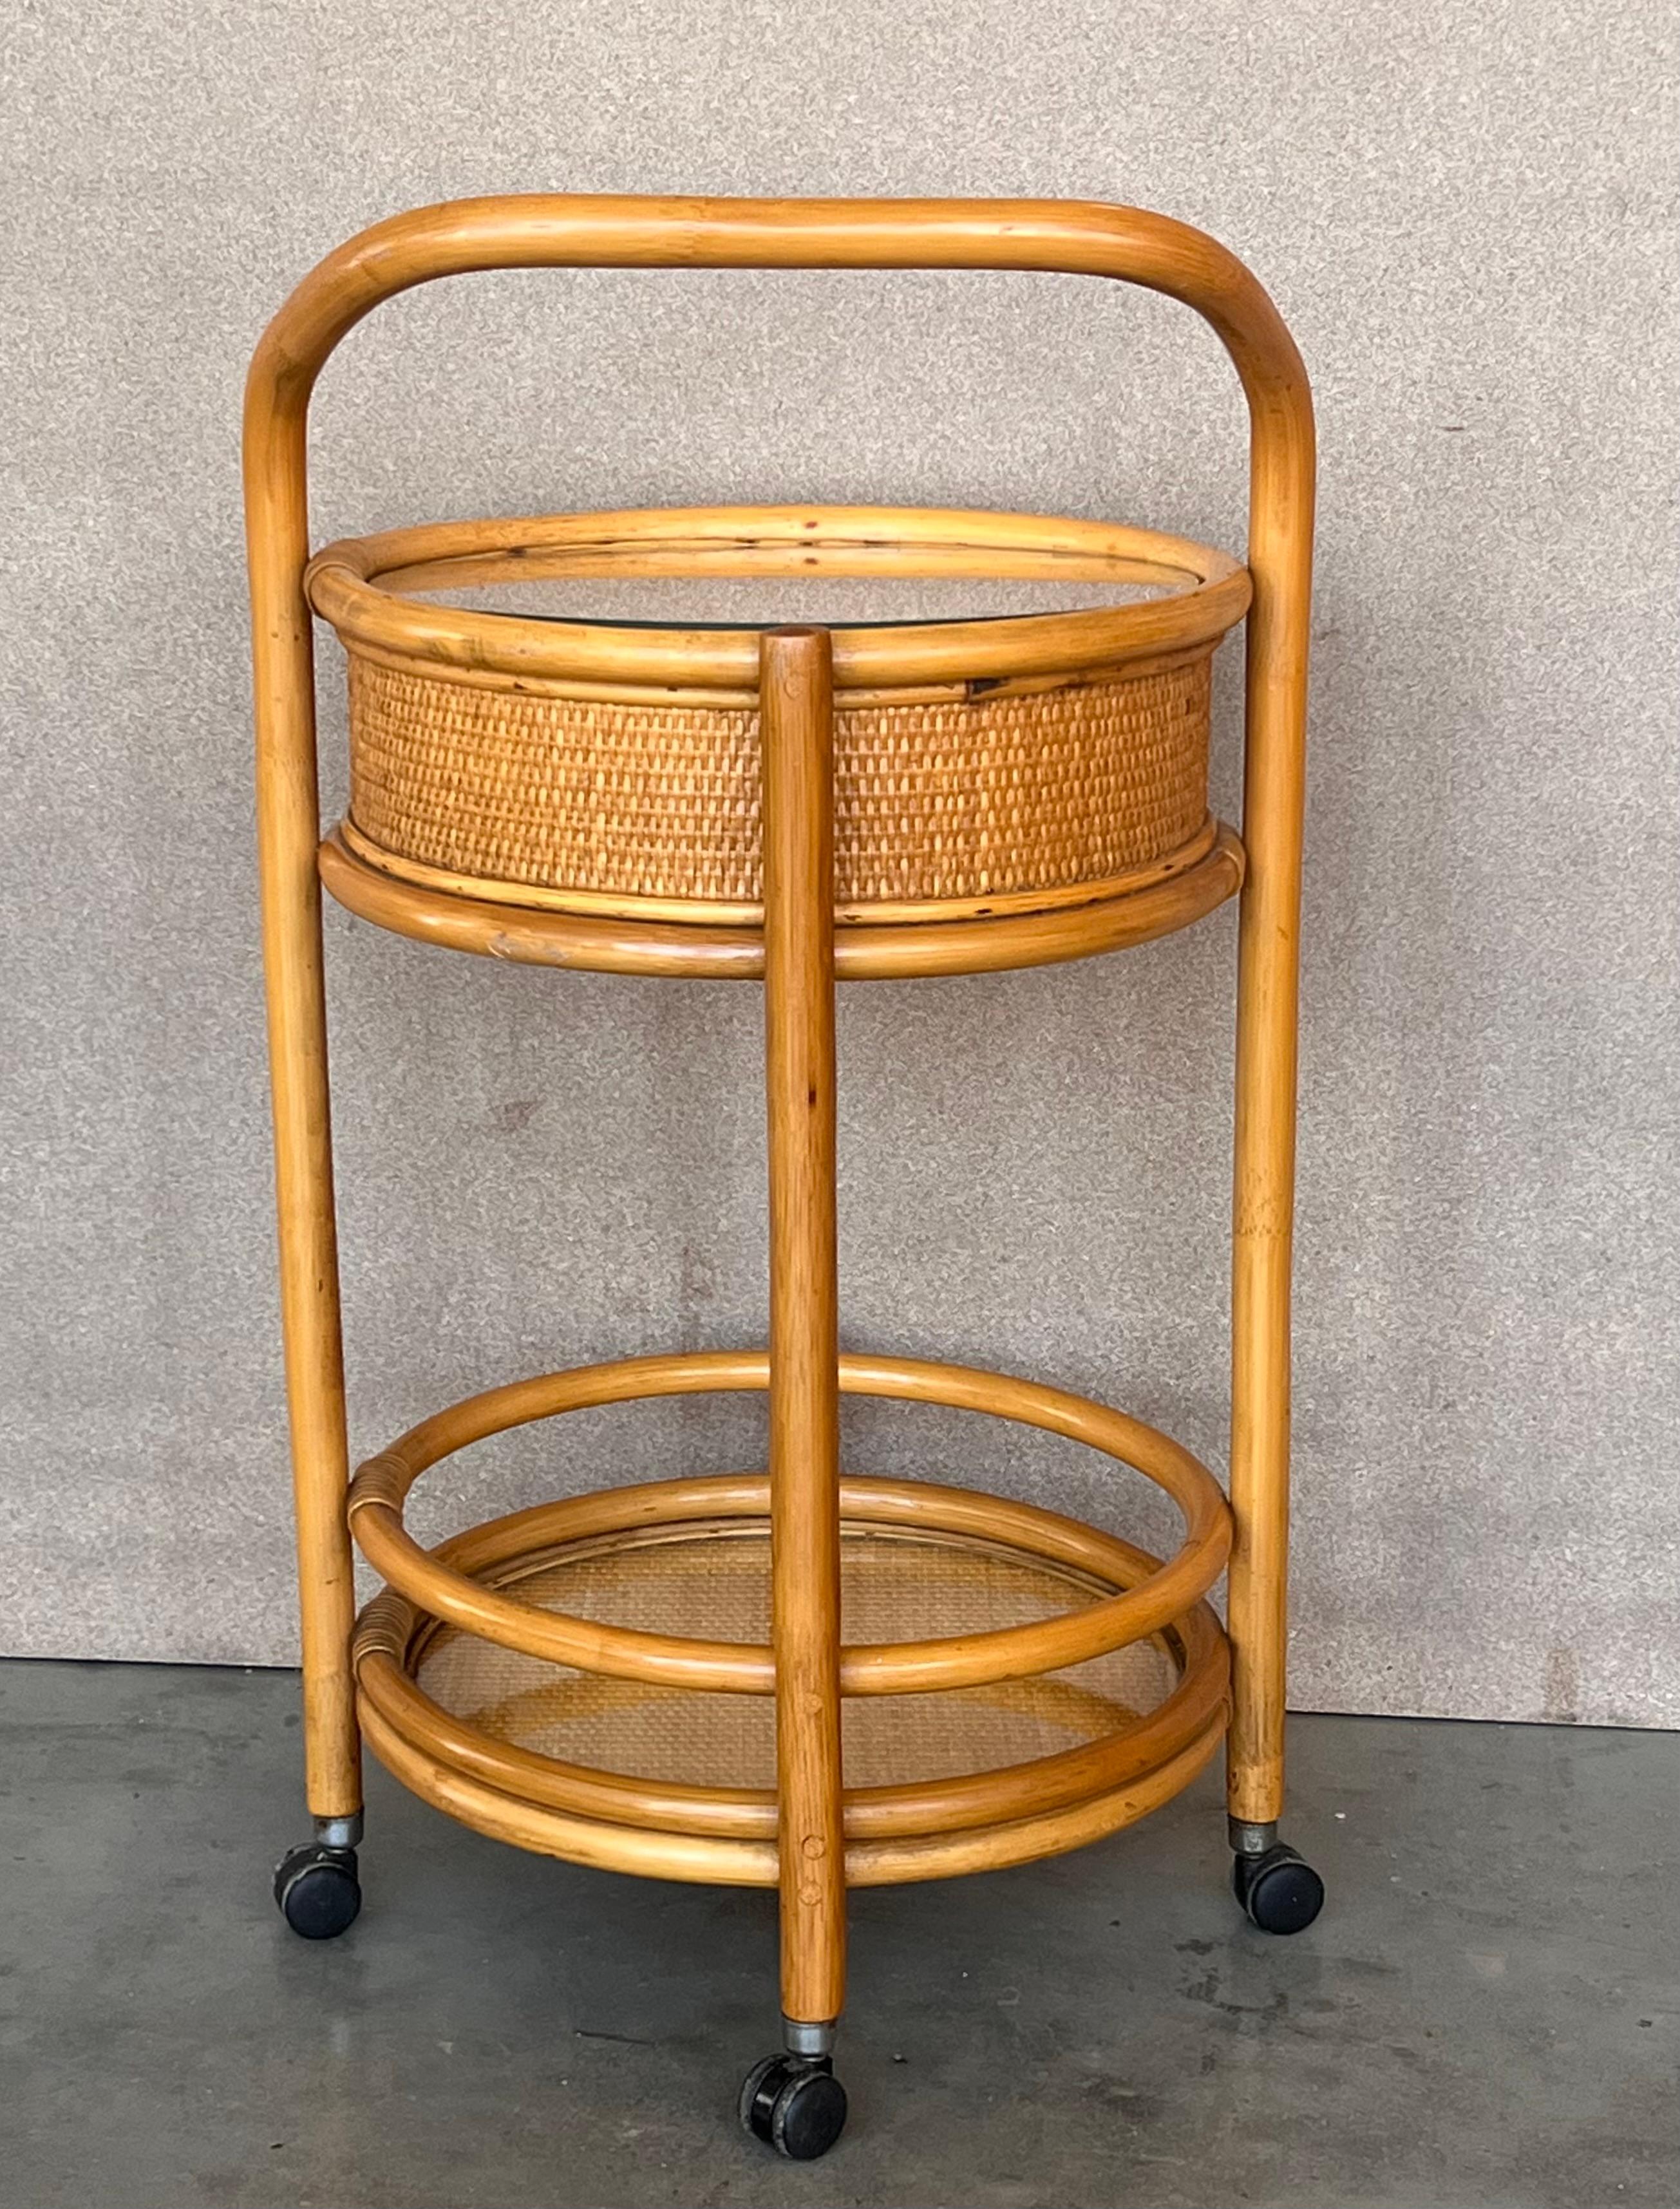 Mid-Century Modern Mid 20th Century Round Serving Bar Cart Trolley in Bamboo & Rattan Italy, 1960s For Sale